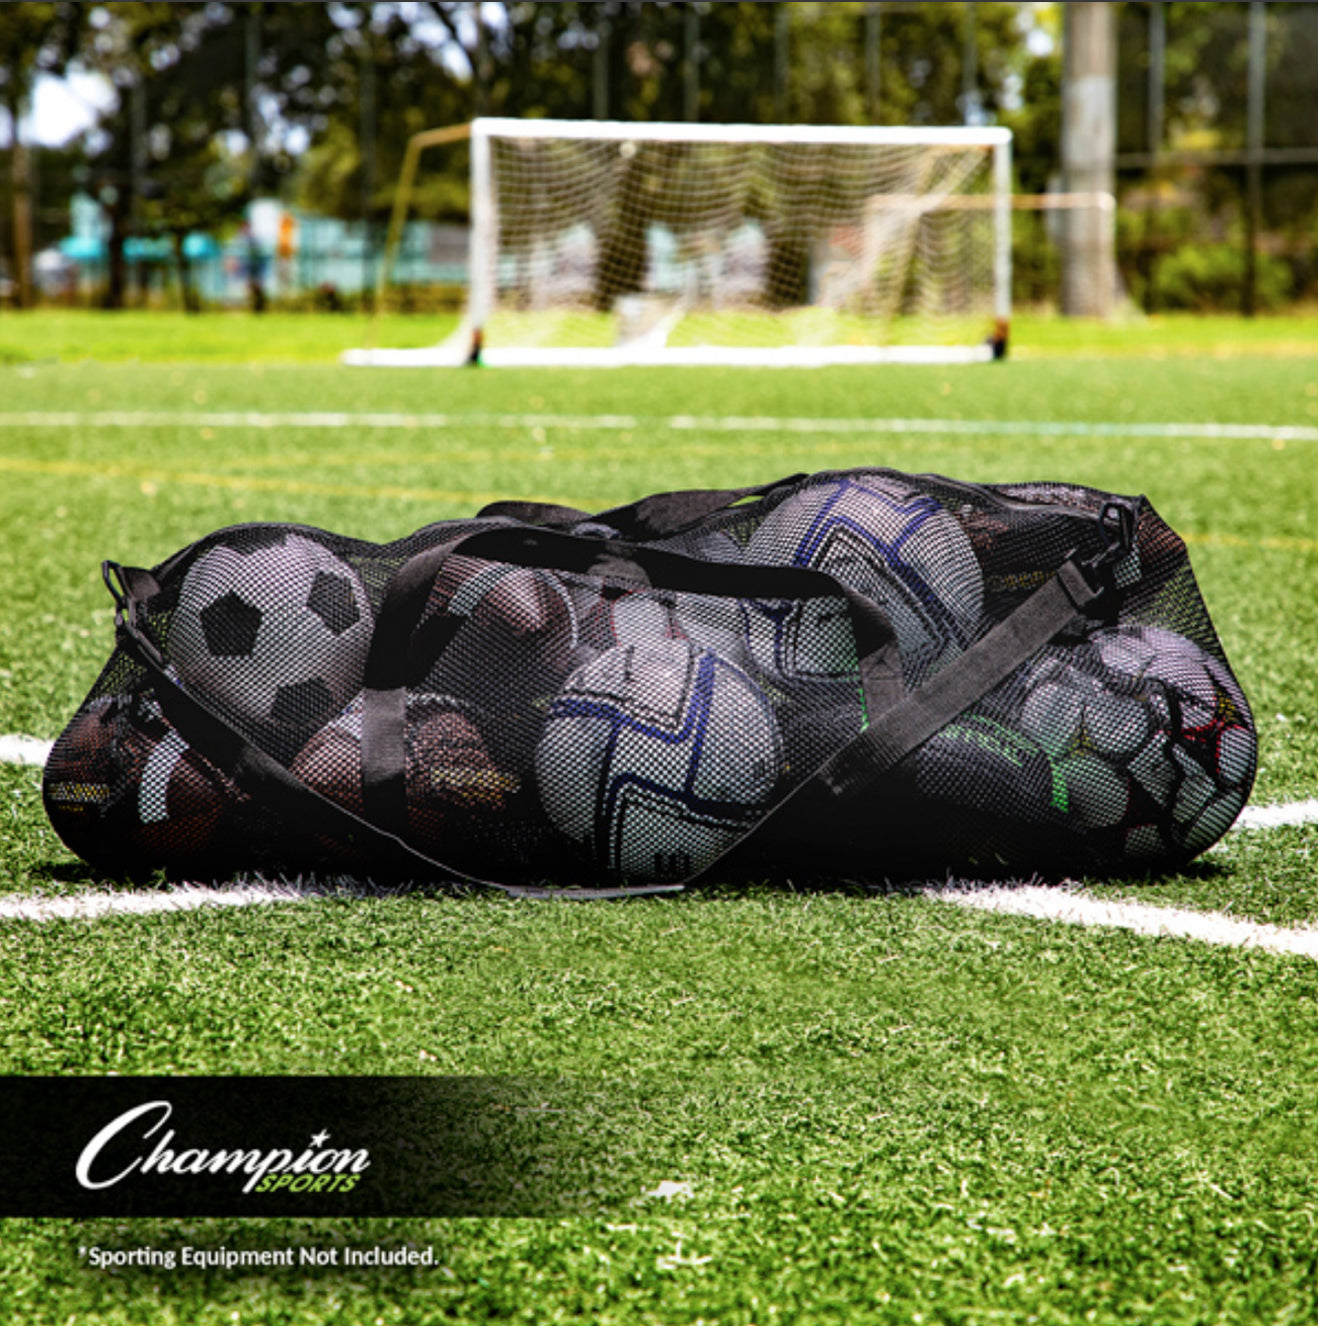 Mesh Duffel Bag with Shoulder Strap - Youth Sports Products